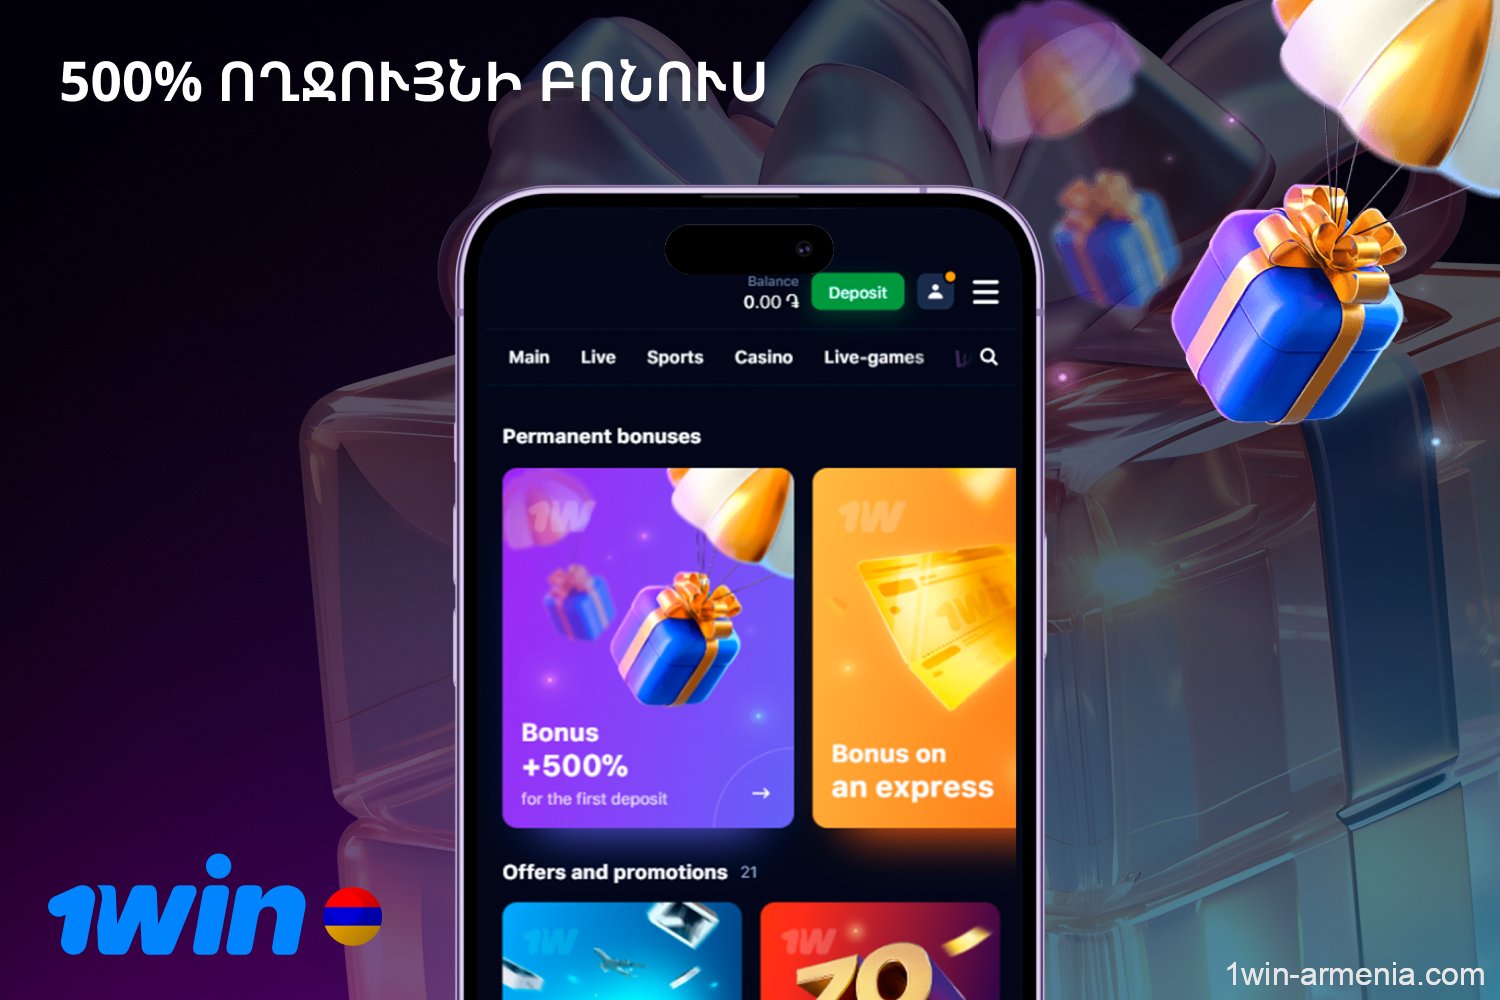 1win welcome bonus is a special offer available to every newcomer from Armenia